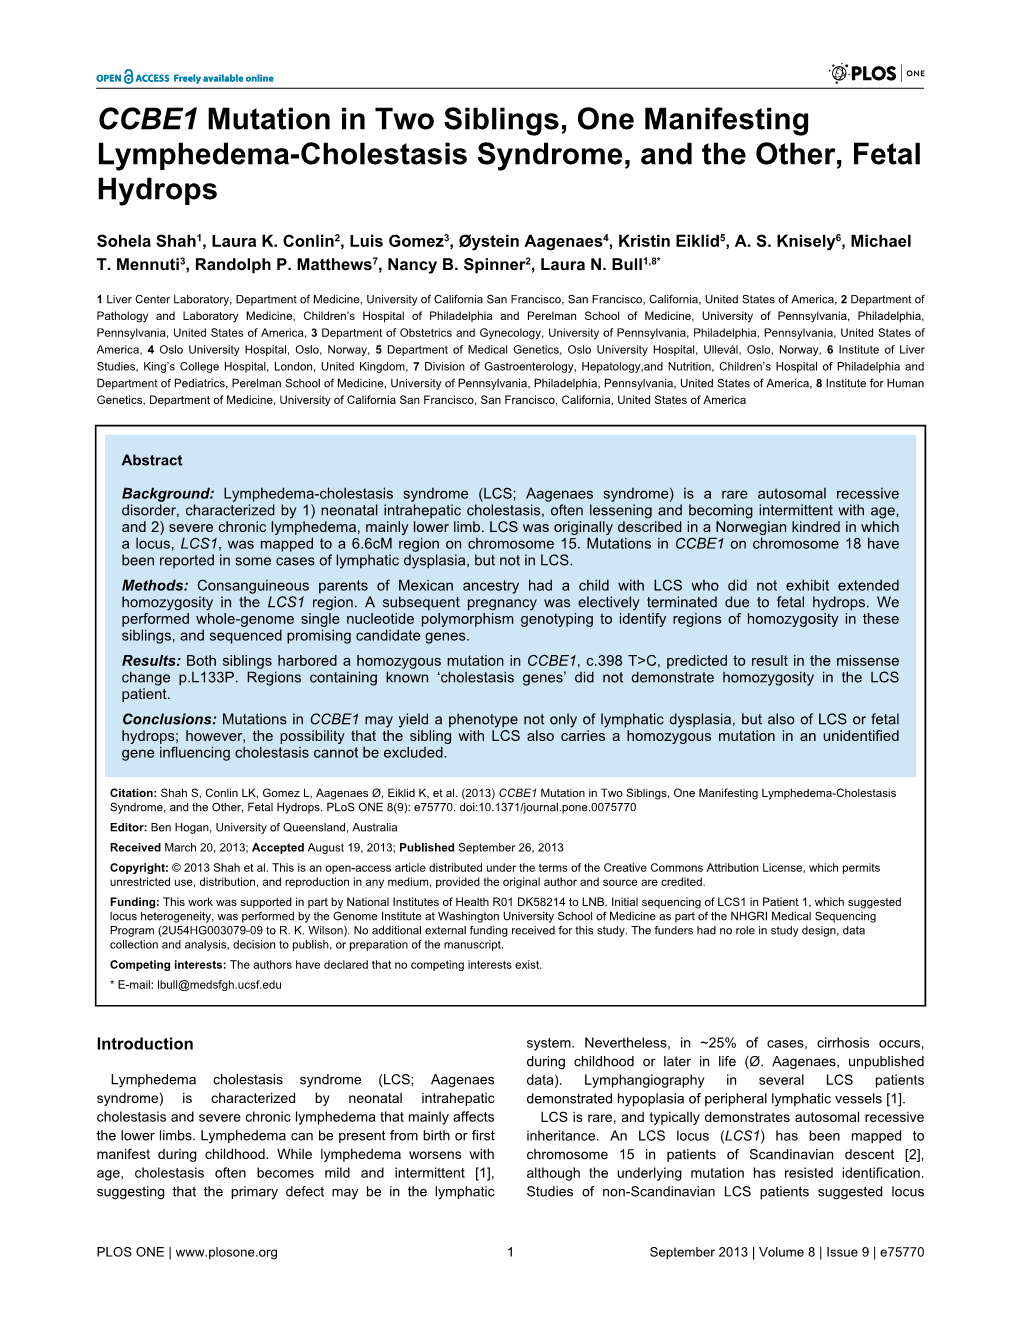 CCBE1 Mutation in Two Siblings, One Manifesting Lymphedema-Cholestasis Syndrome, and the Other, Fetal Hydrops